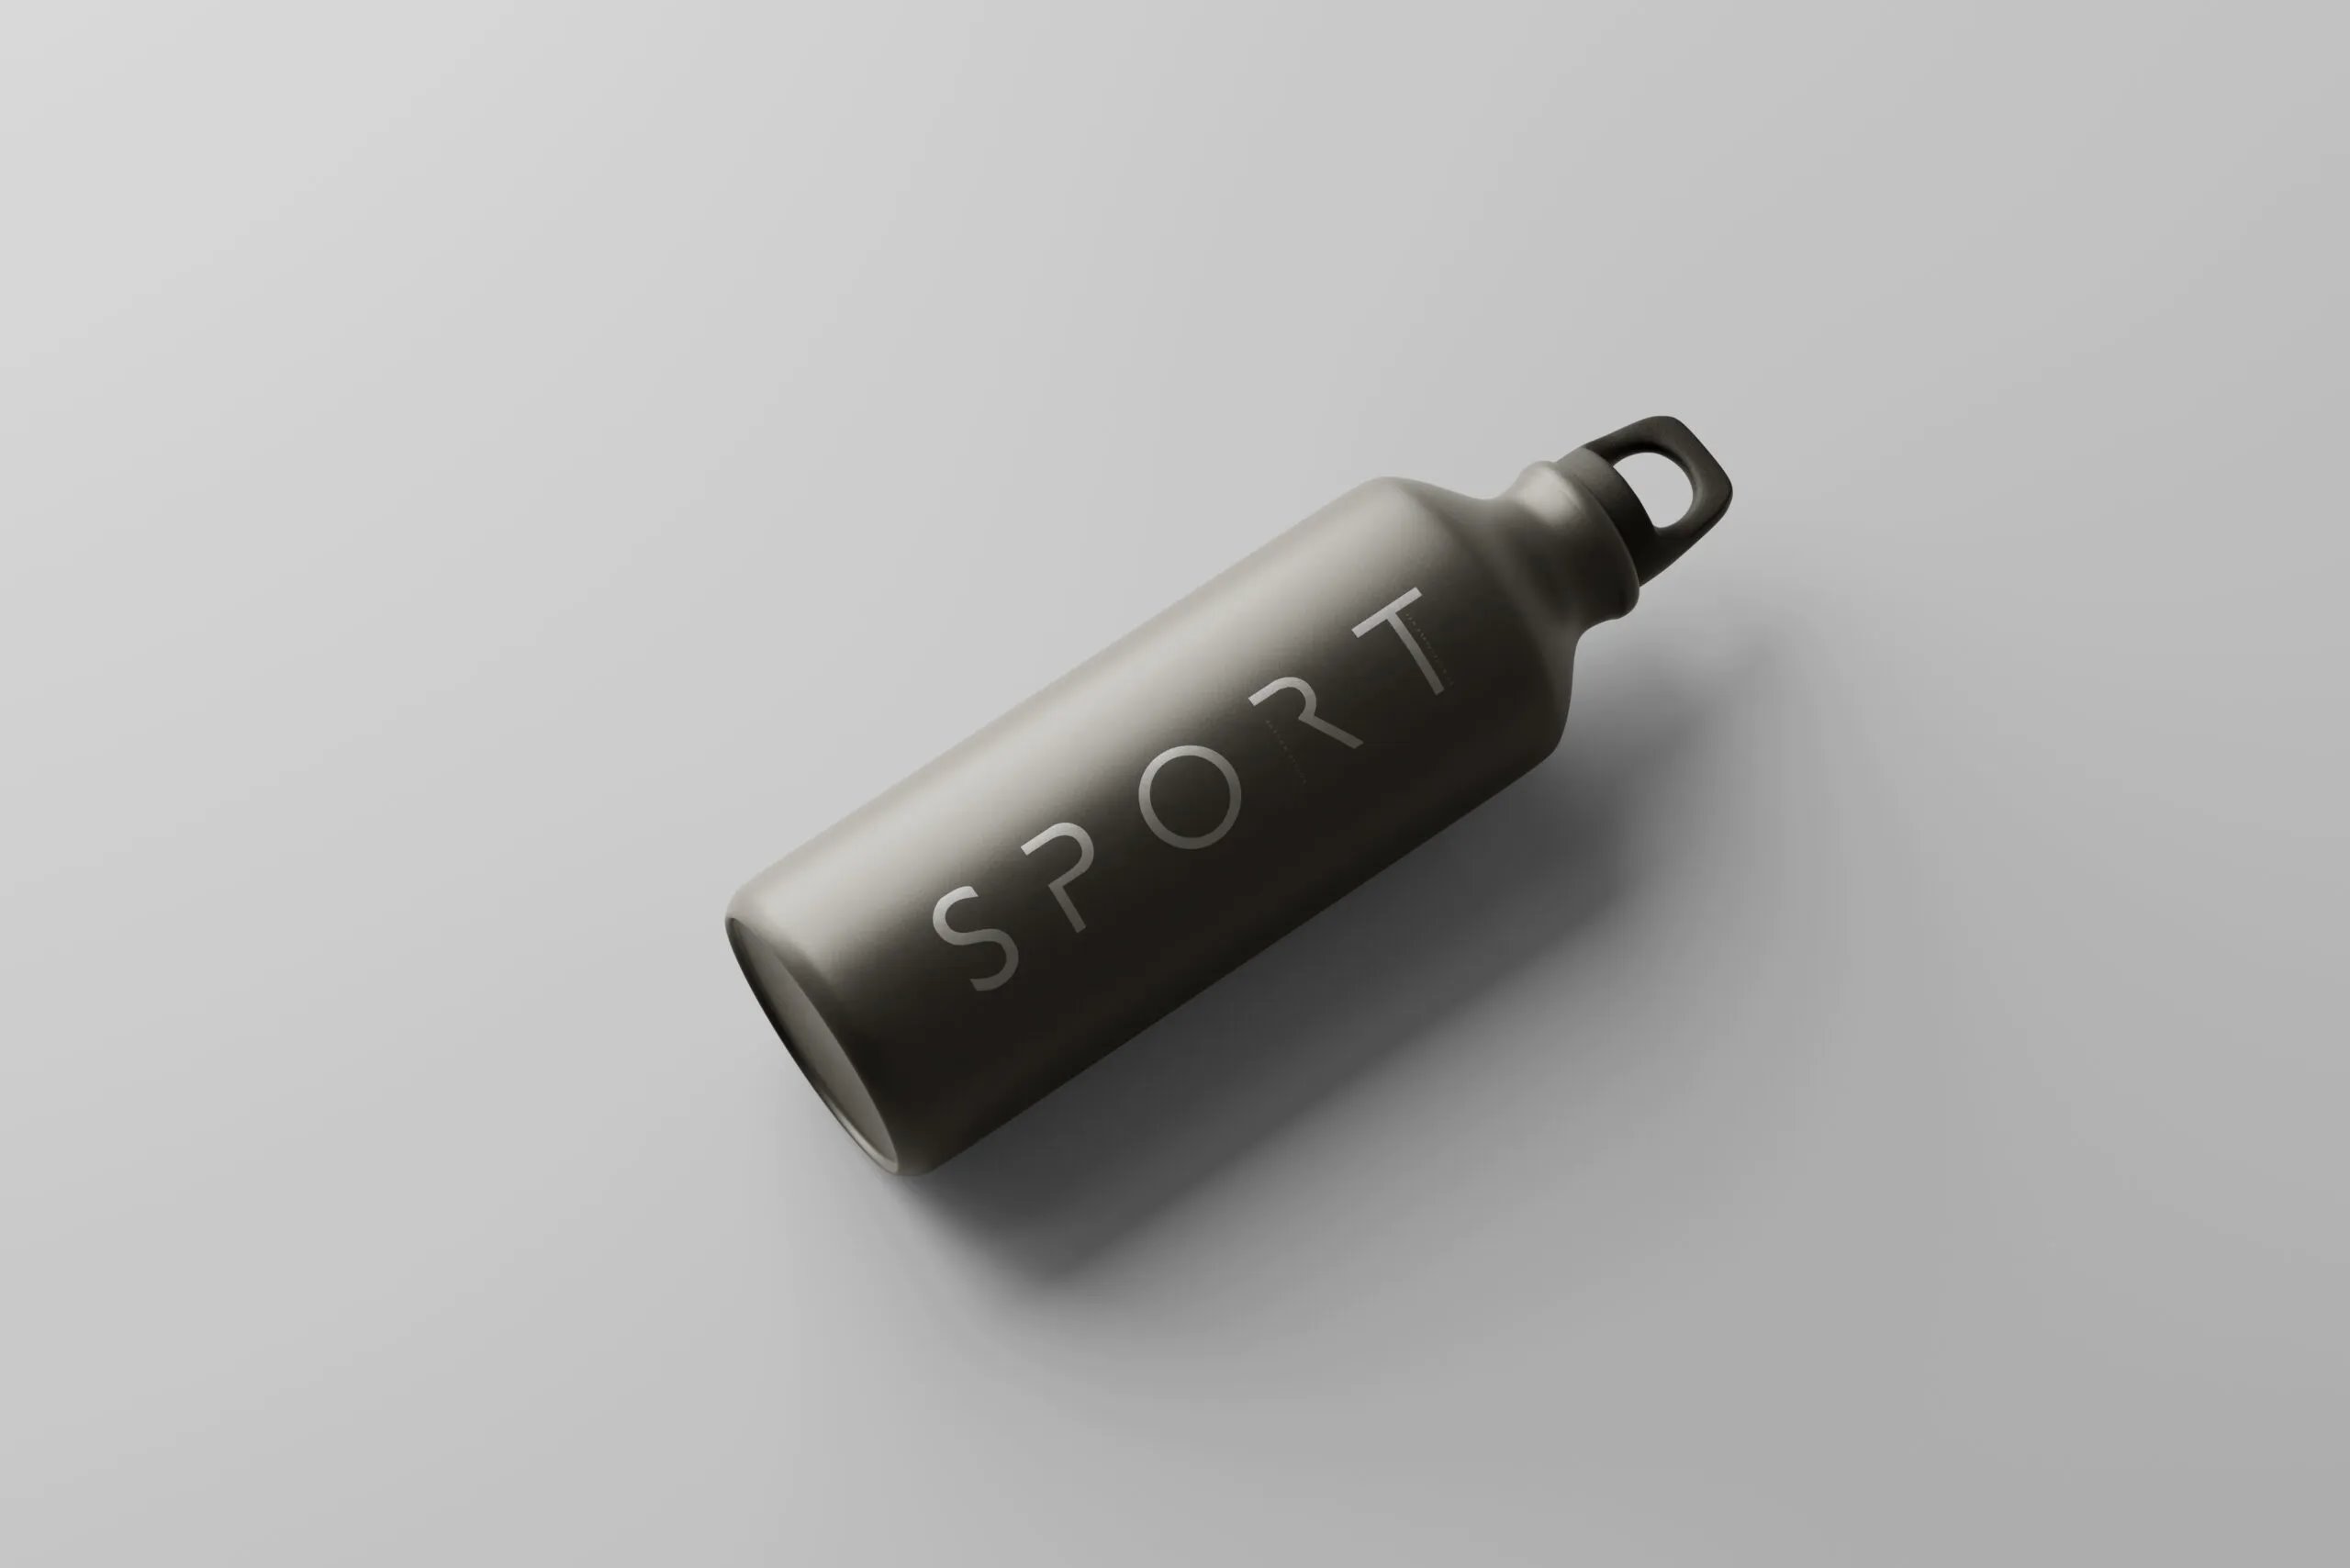 5 Mockups of Sport Bottle in Different Sights FREE PSD